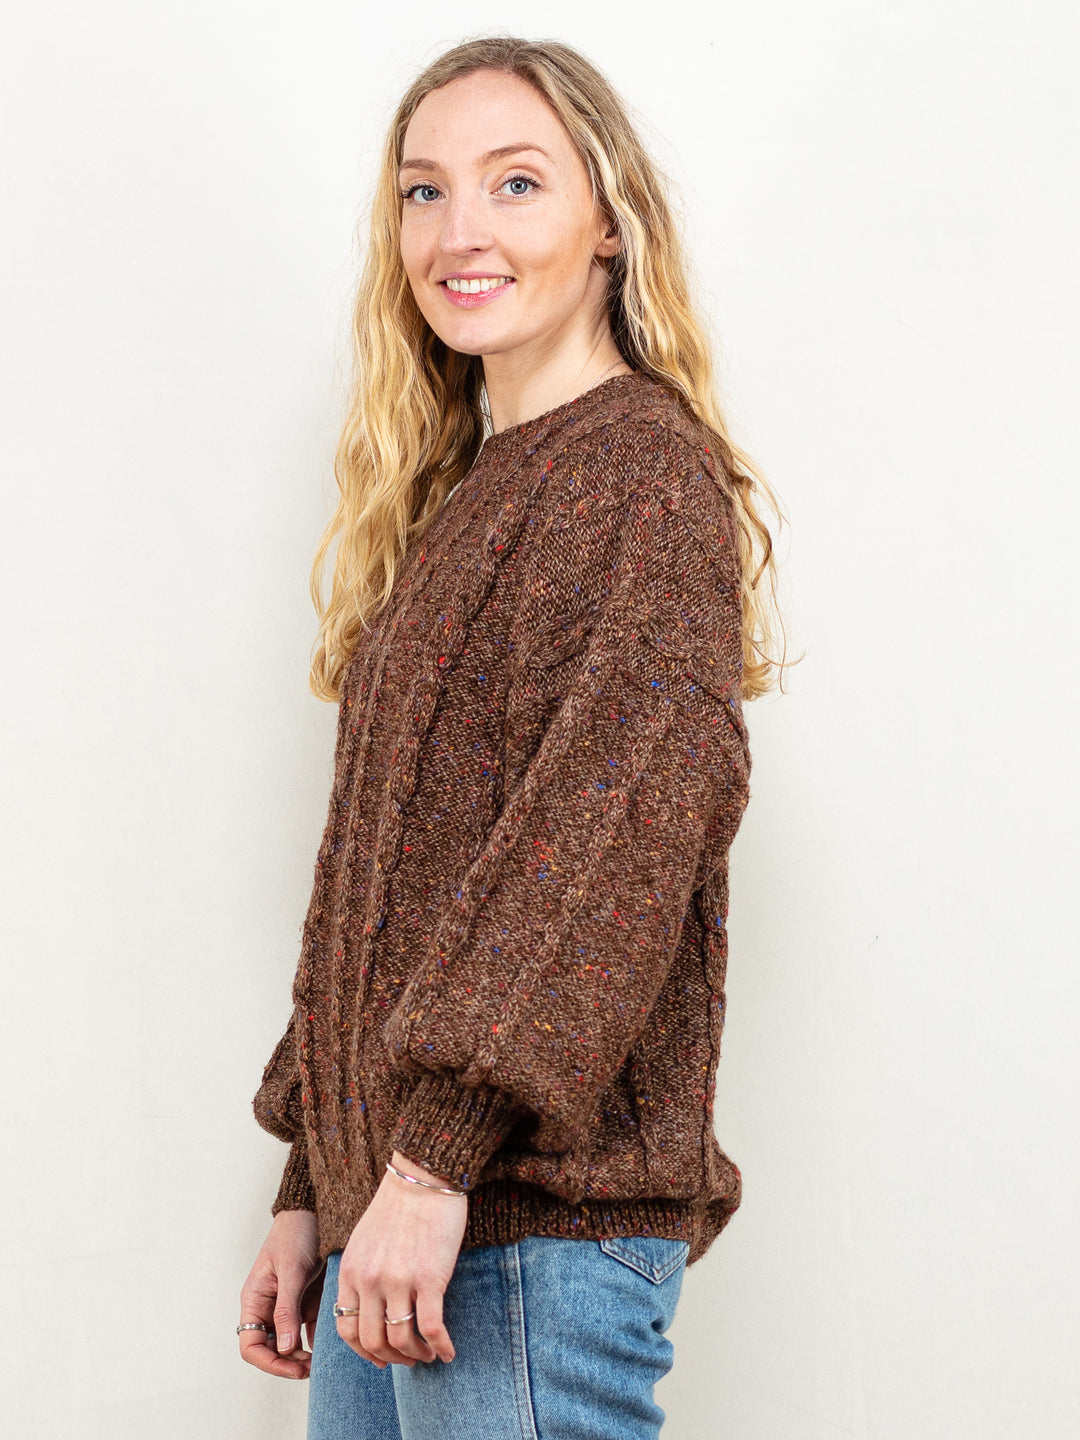 This is a vintage 80's/ 90's hand-knit sweater in brown. Seems to be made of an acrylic blend, because of the soft touch.